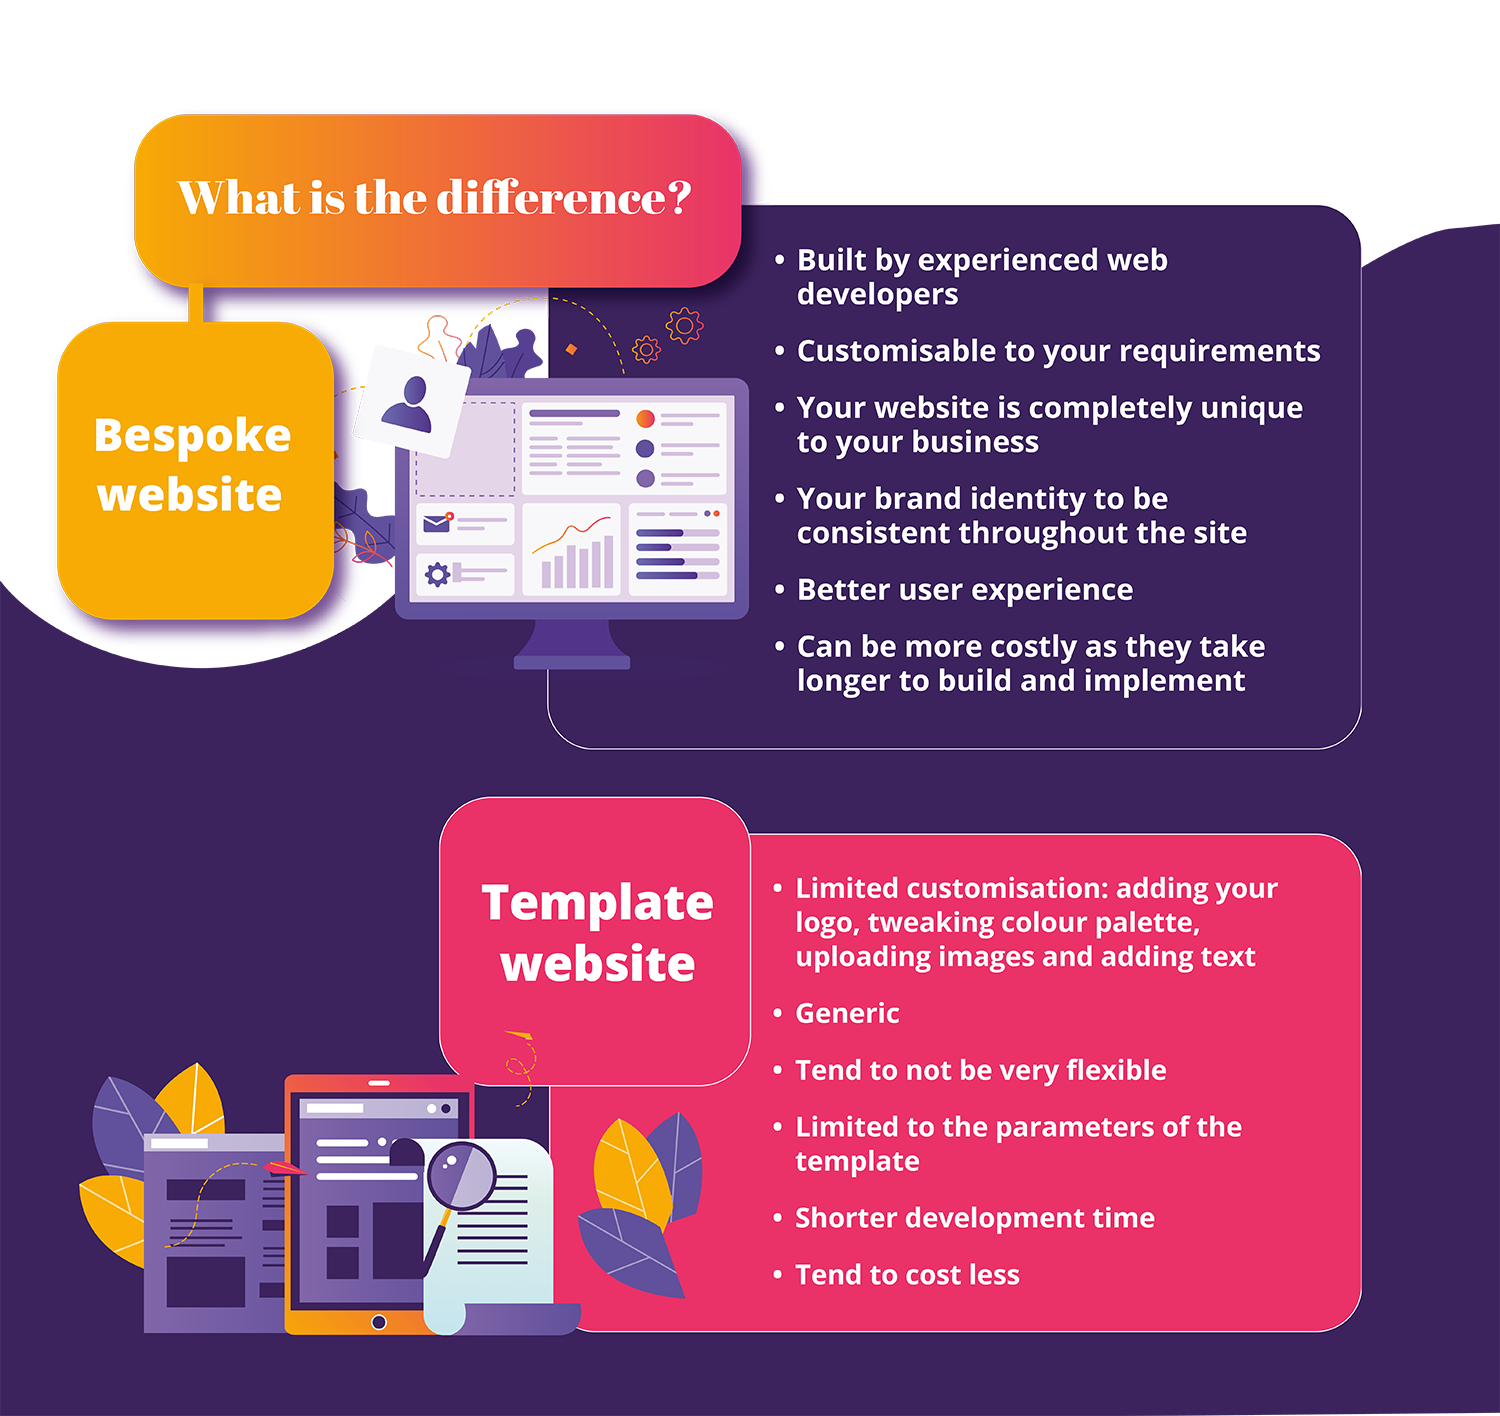 Difference between bespoke and template websites